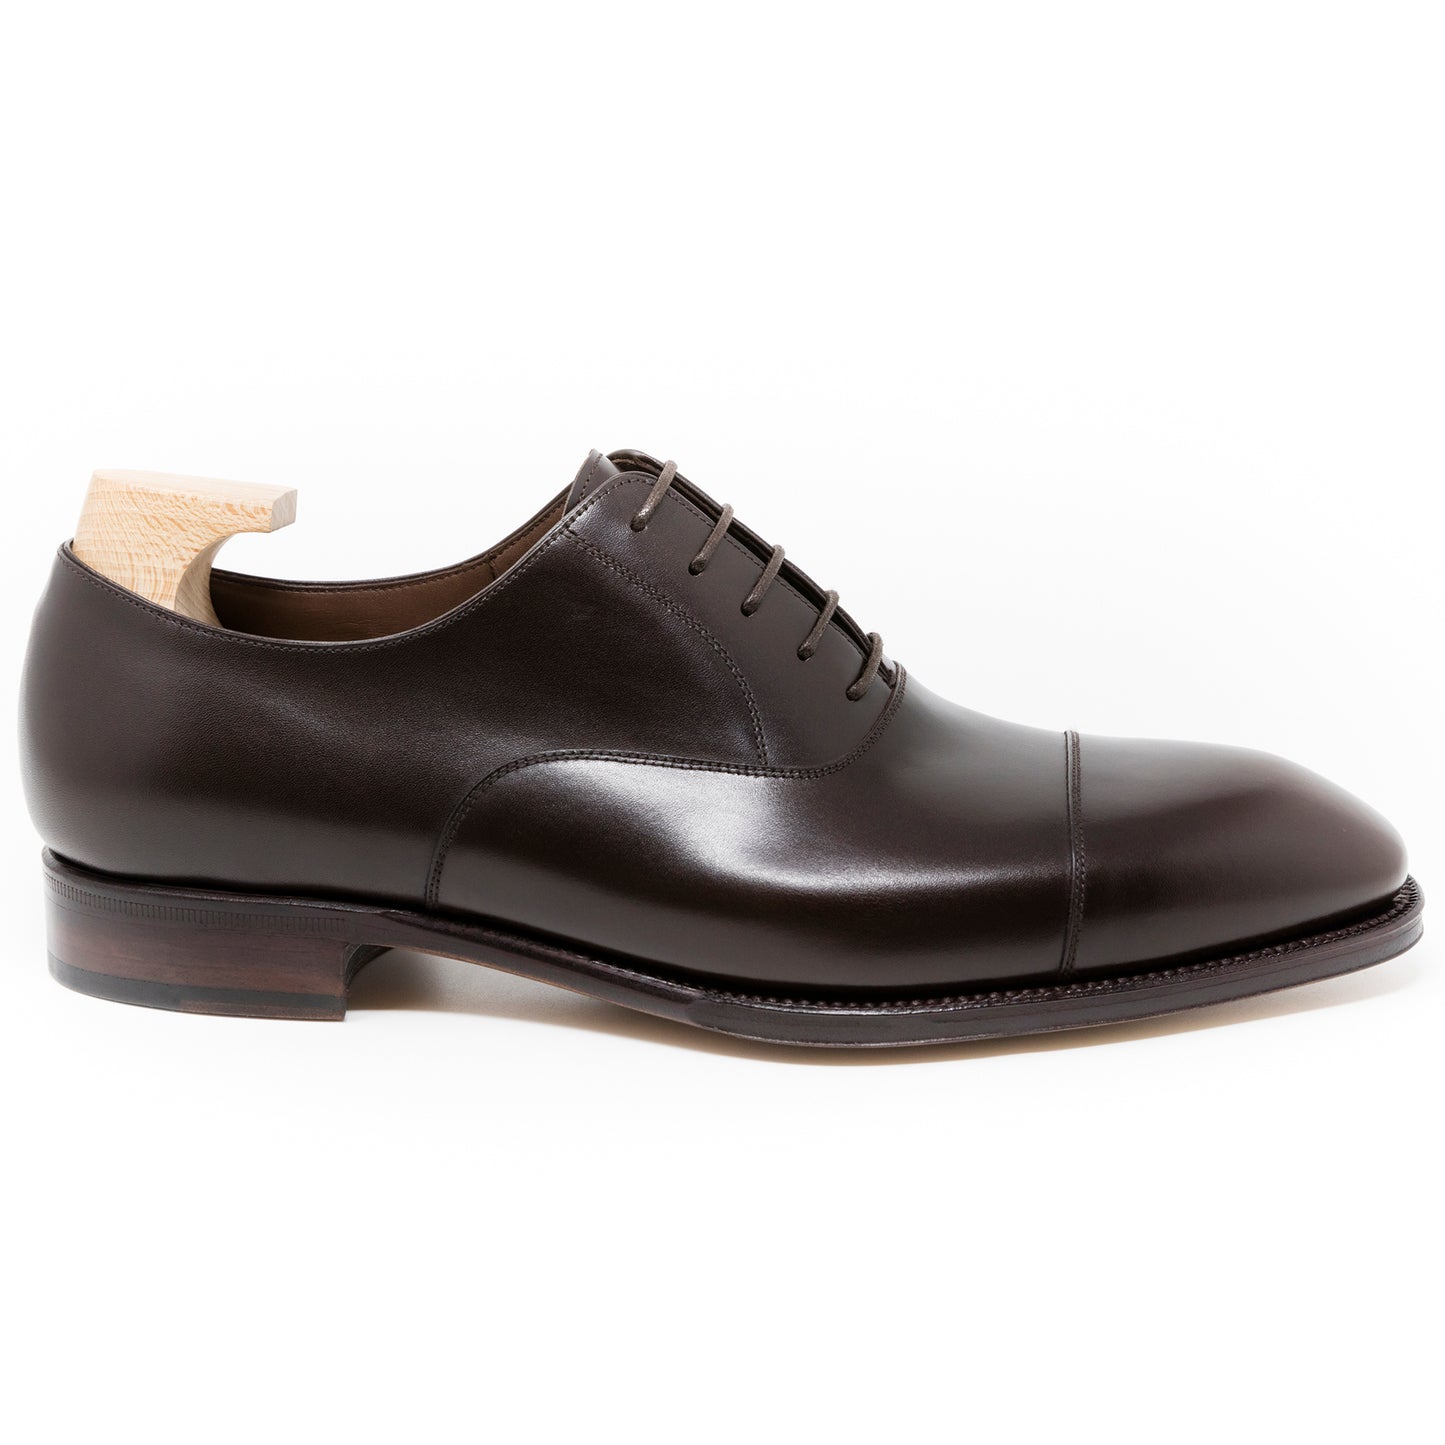 TLB Mallorca leather shoes 502 / ALAN / BOXCALF BROWN